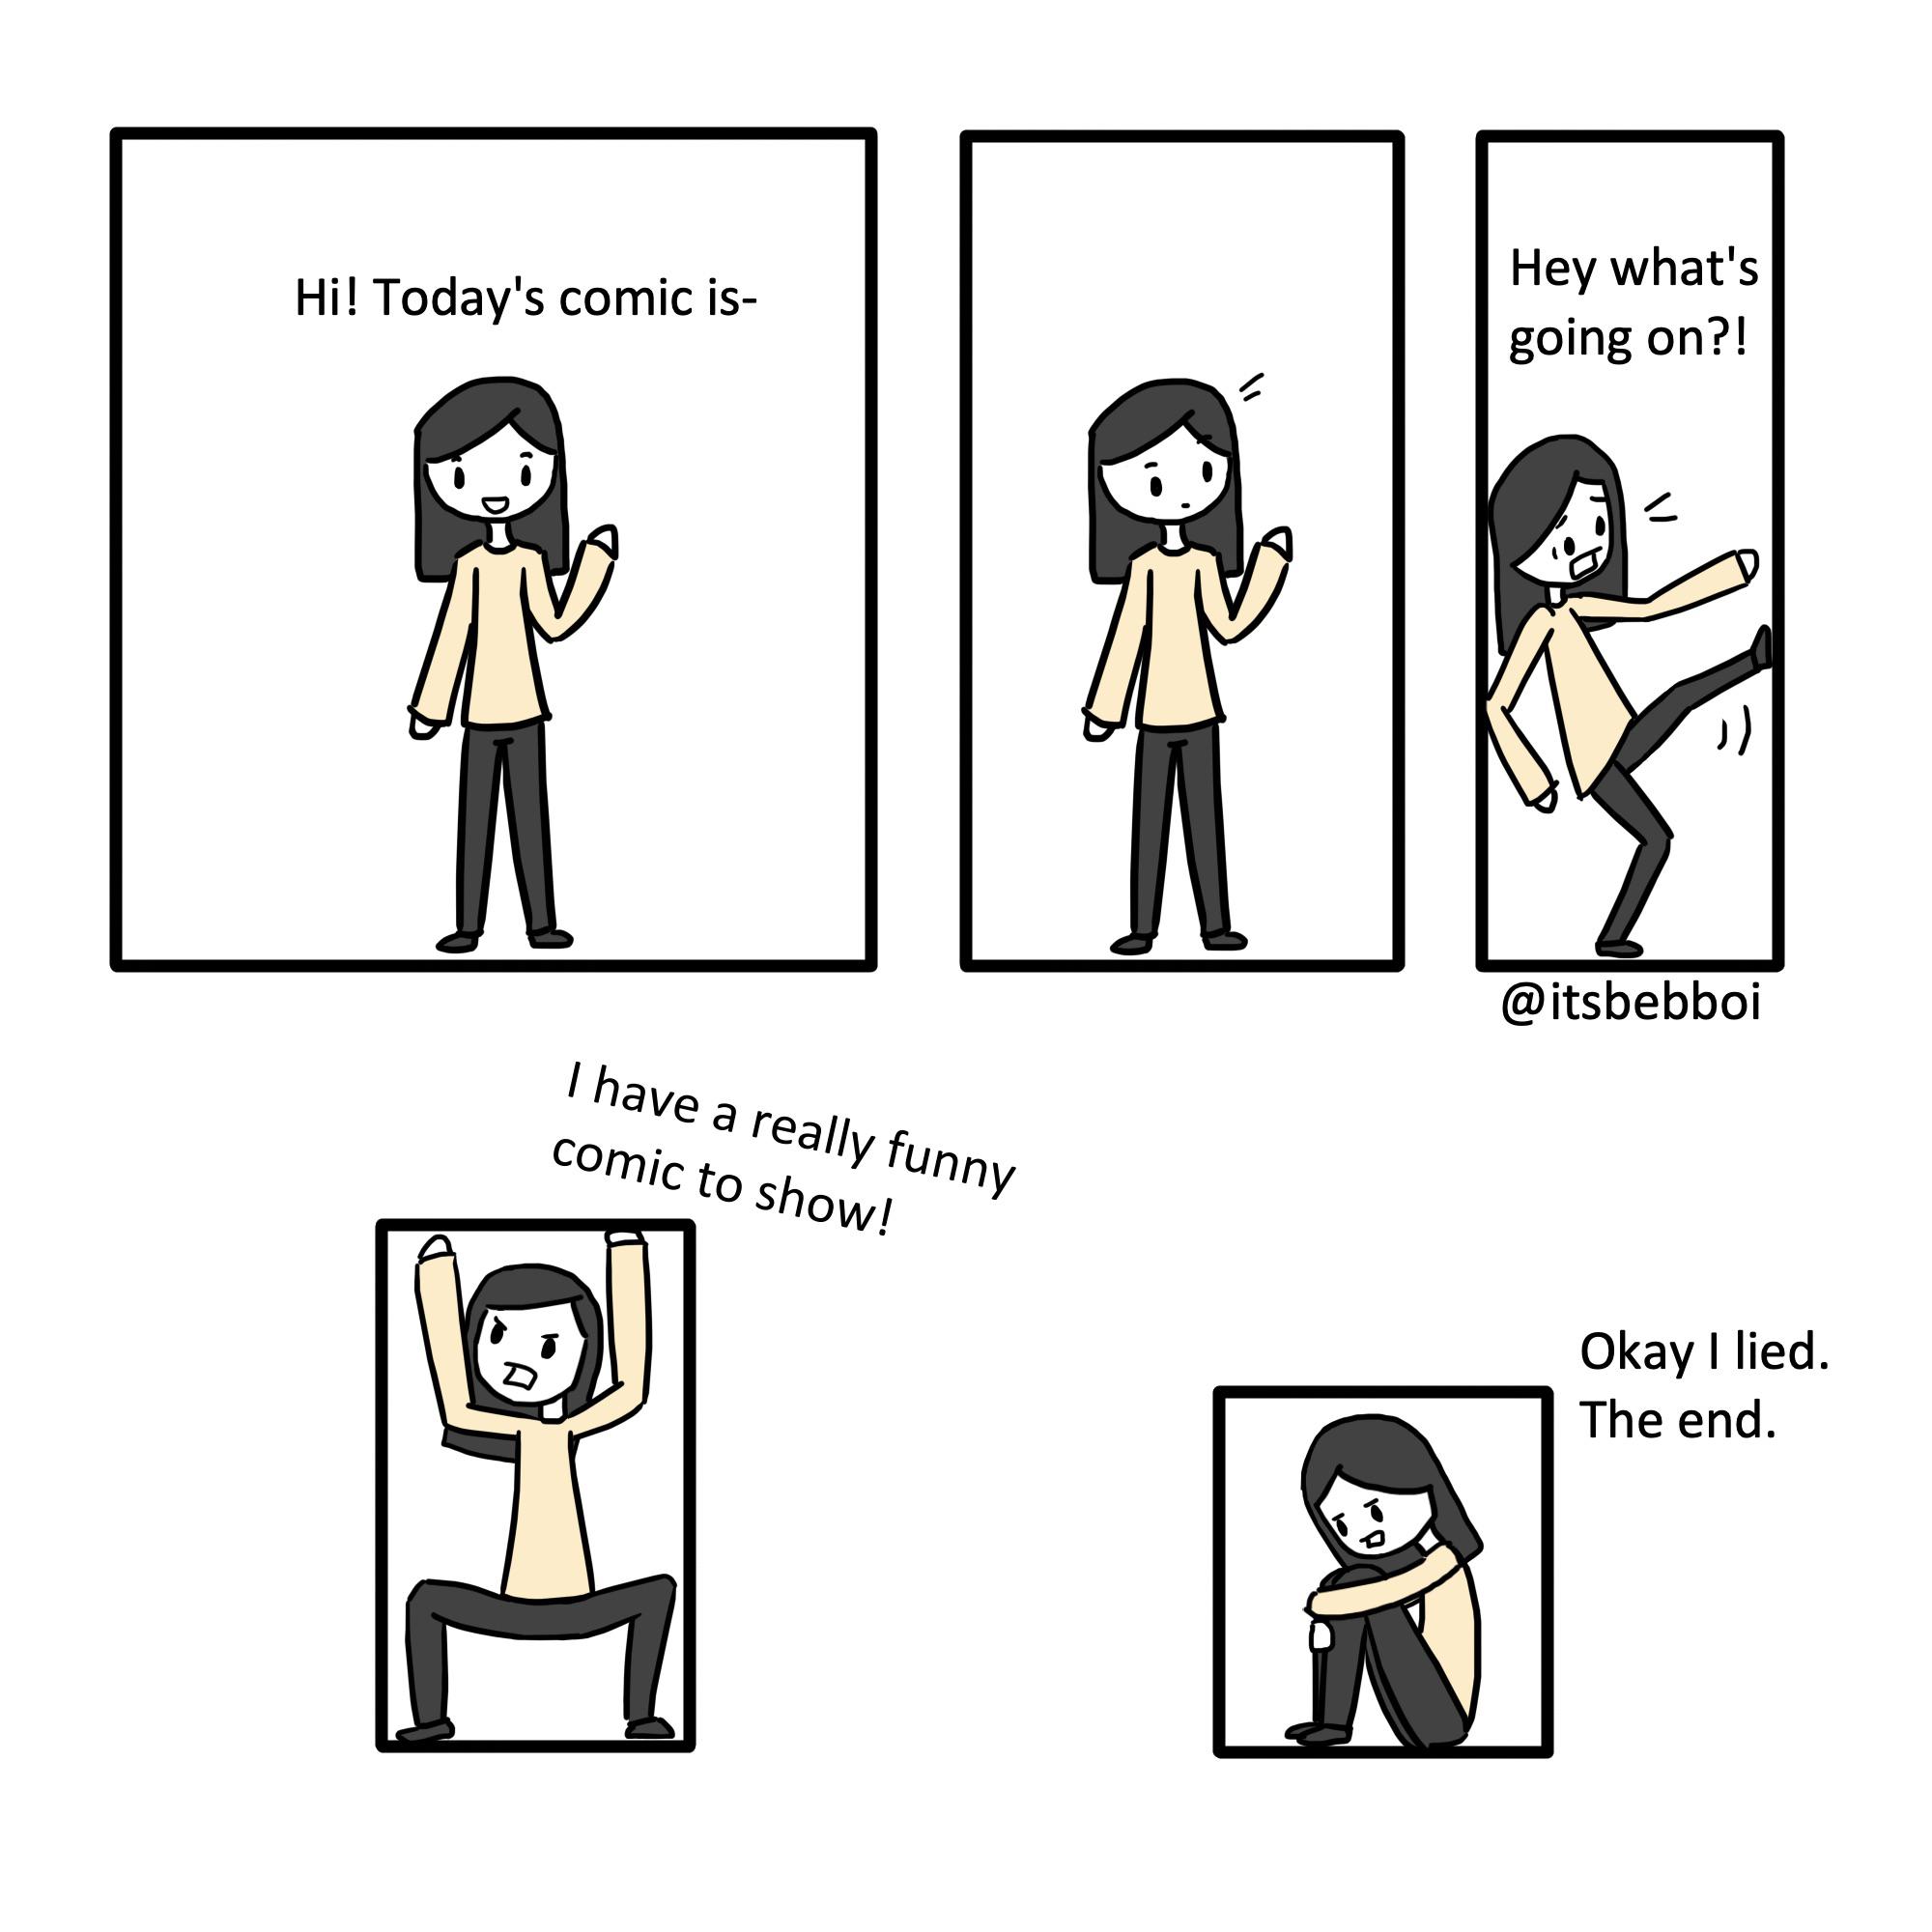 Funny comic (from attemptinglifeandart), Funny Comic, AttemptingLifeAndArt Comics Funny comic (from attemptinglifeandart), Funny Comic, AttemptingLifeAndArt text: Hi! Today's comic is- I have a really funny comic to show! Hey what's going on?! J) @itsbebboi Okay I lied. The end. 